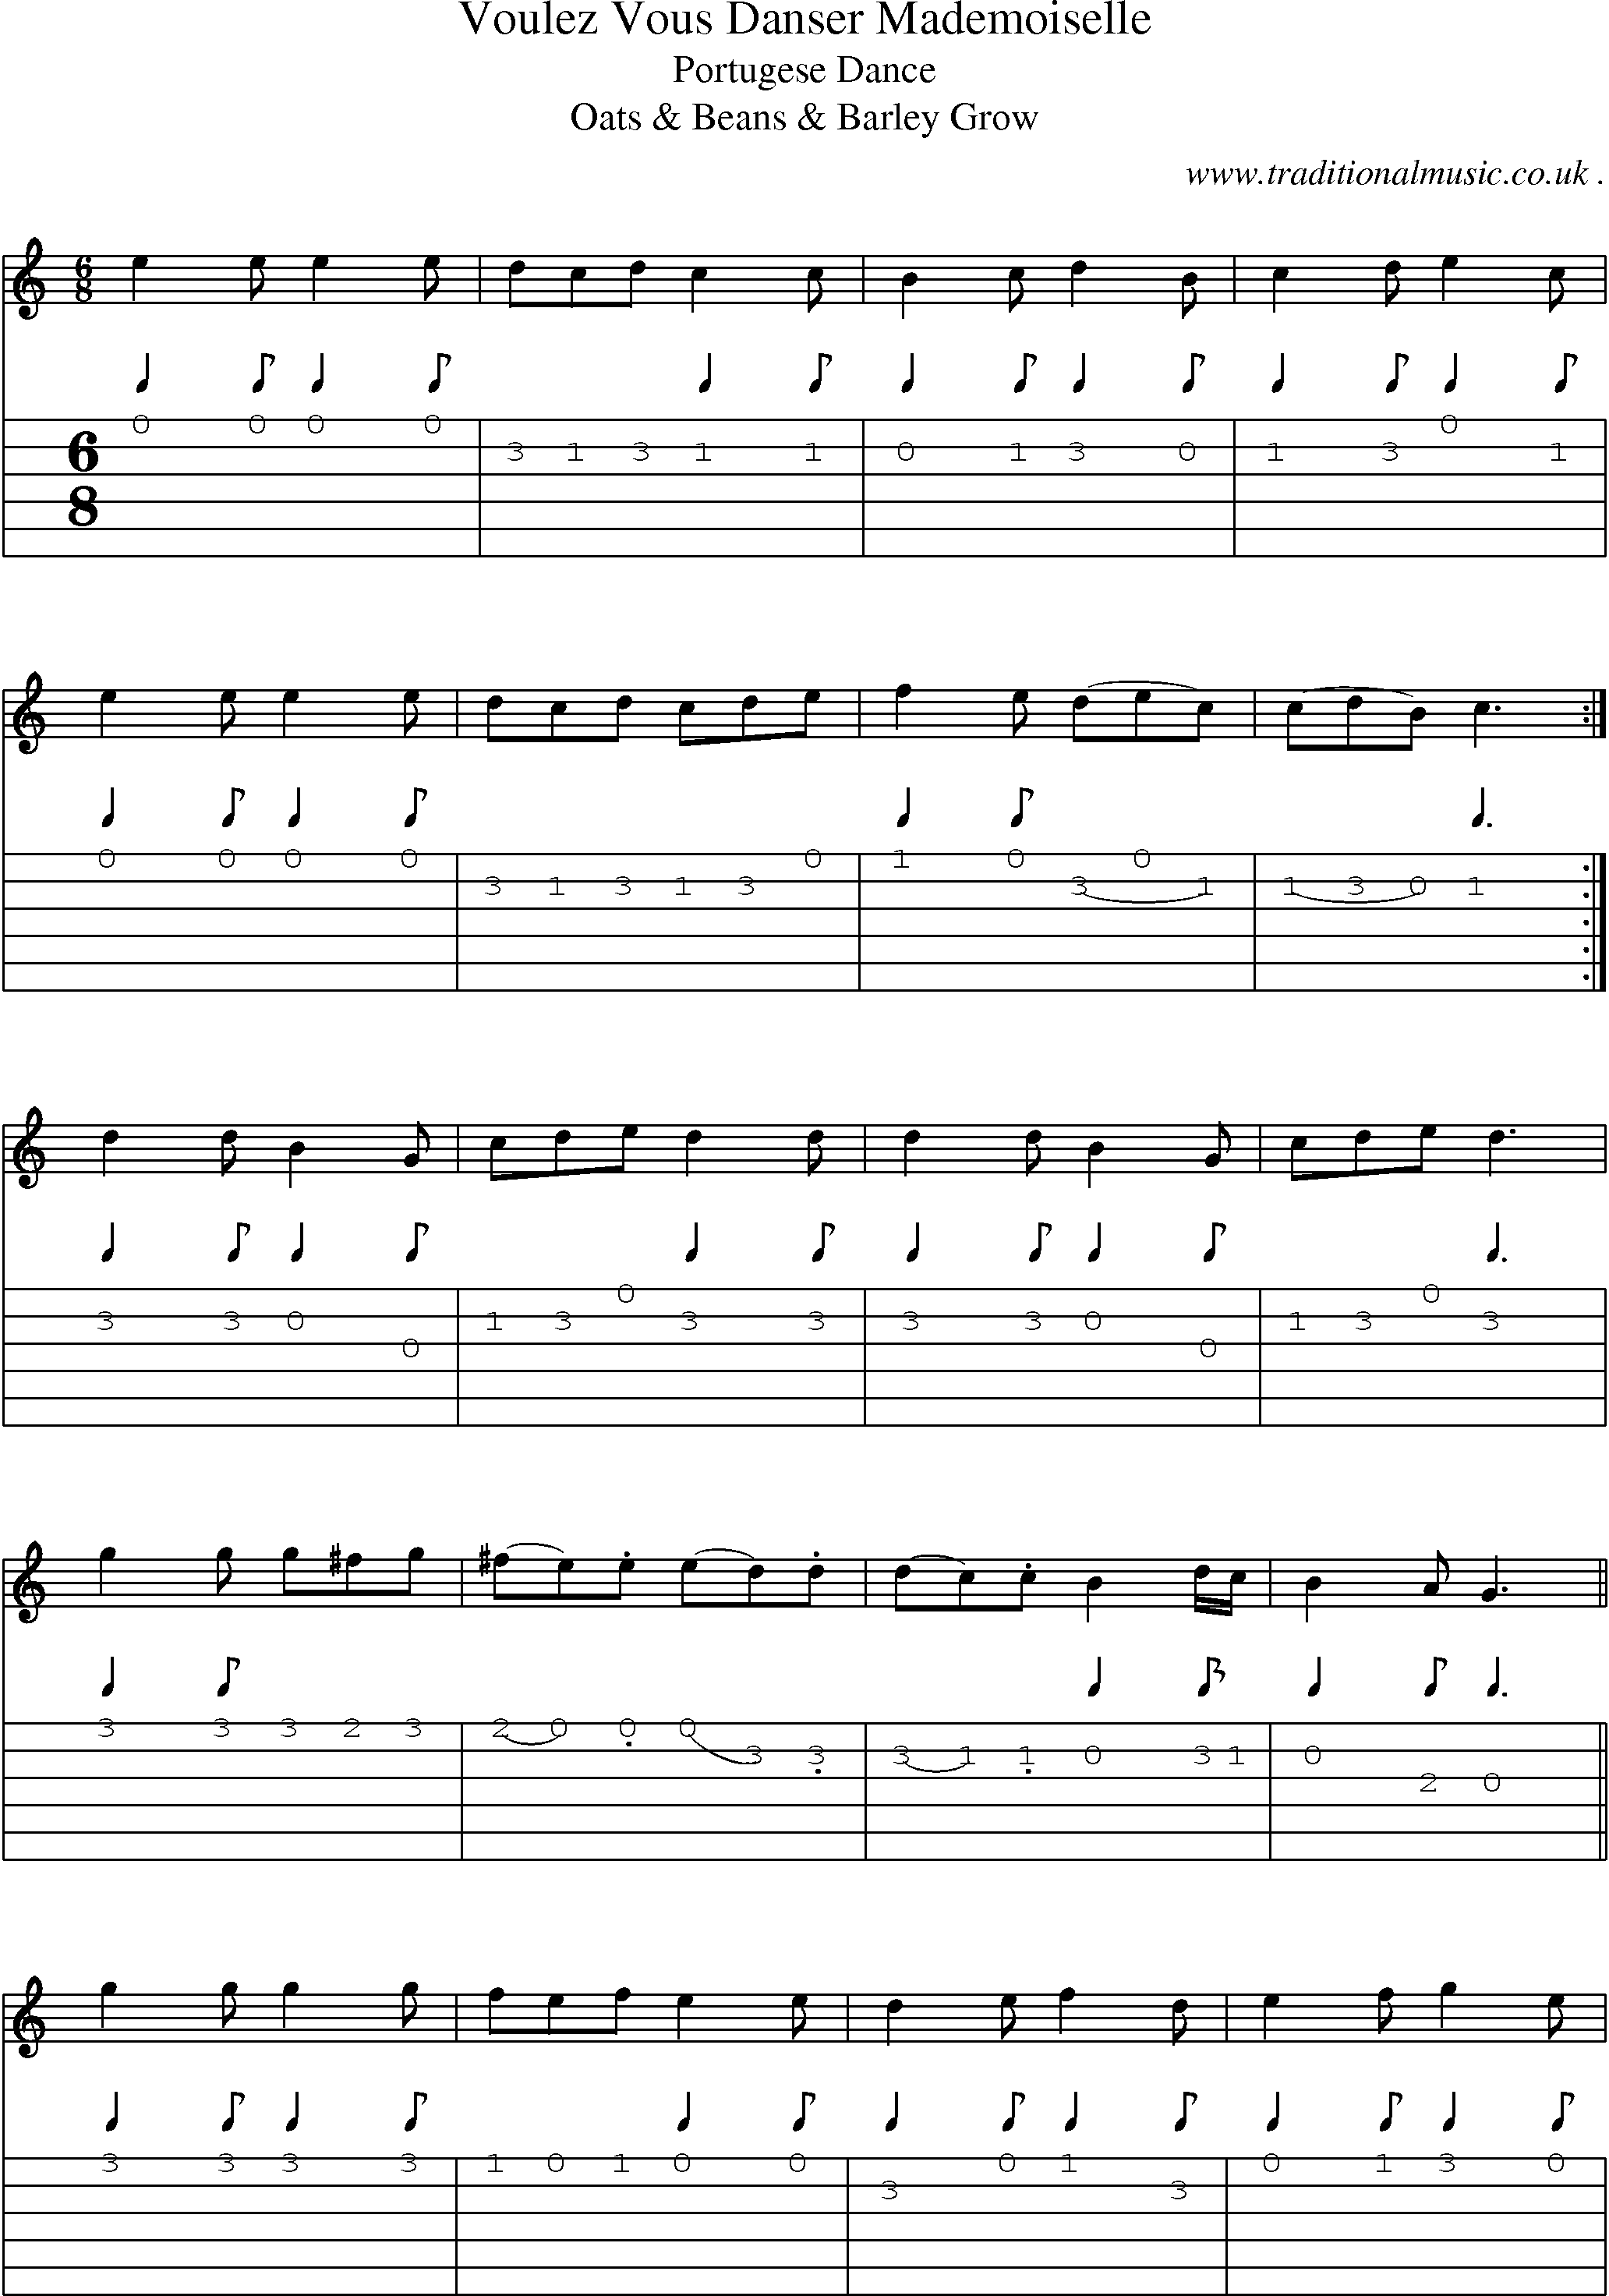 Sheet-Music and Guitar Tabs for Voulez Vous Danser Mademoiselle